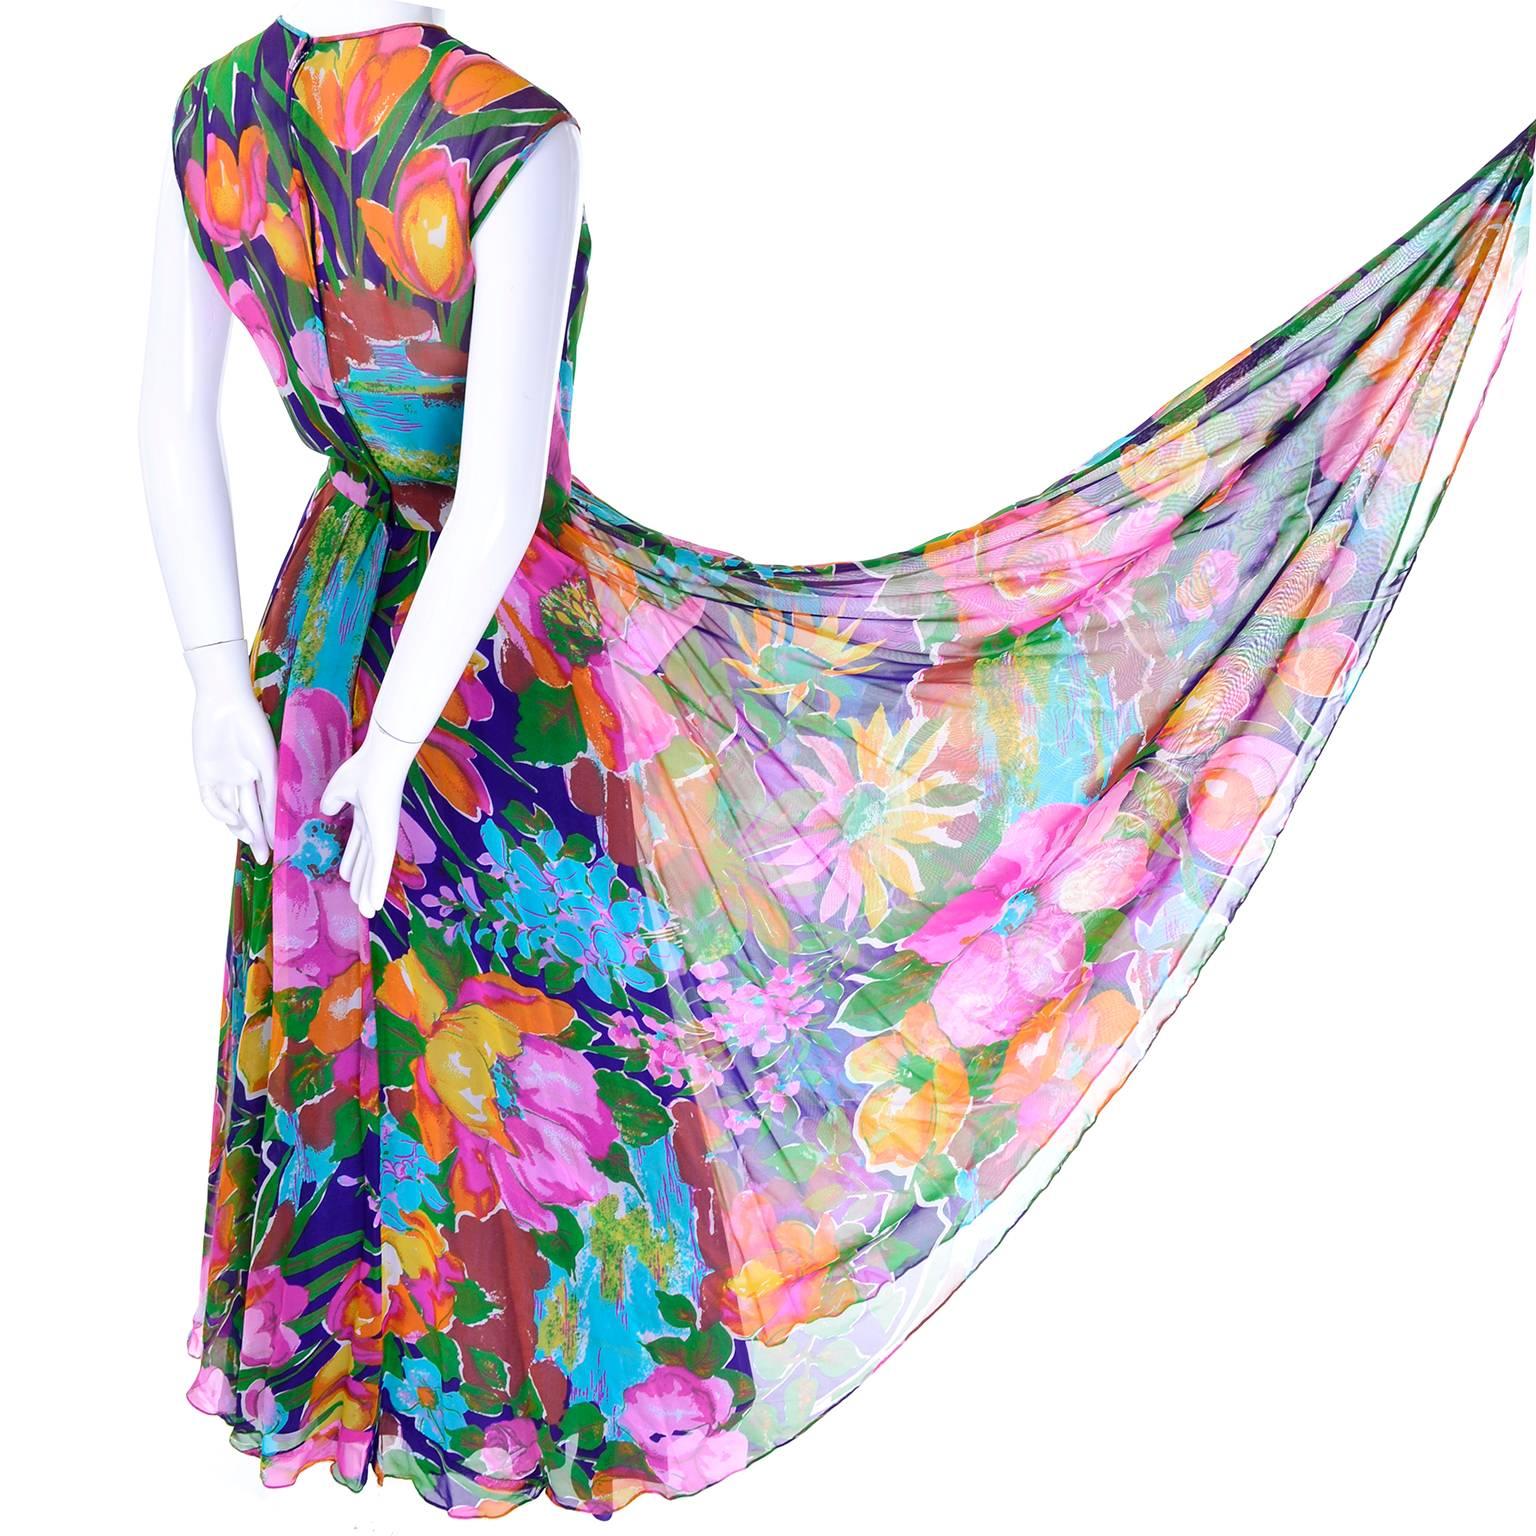 This is a great vintage chiffon dress in a bold chiffon floral print from the 1970's. The upper part of the bodice is semi sheer and the rest of the dress is lined in green satin.  the dress has a fitted waist and full skirt and closes with a back